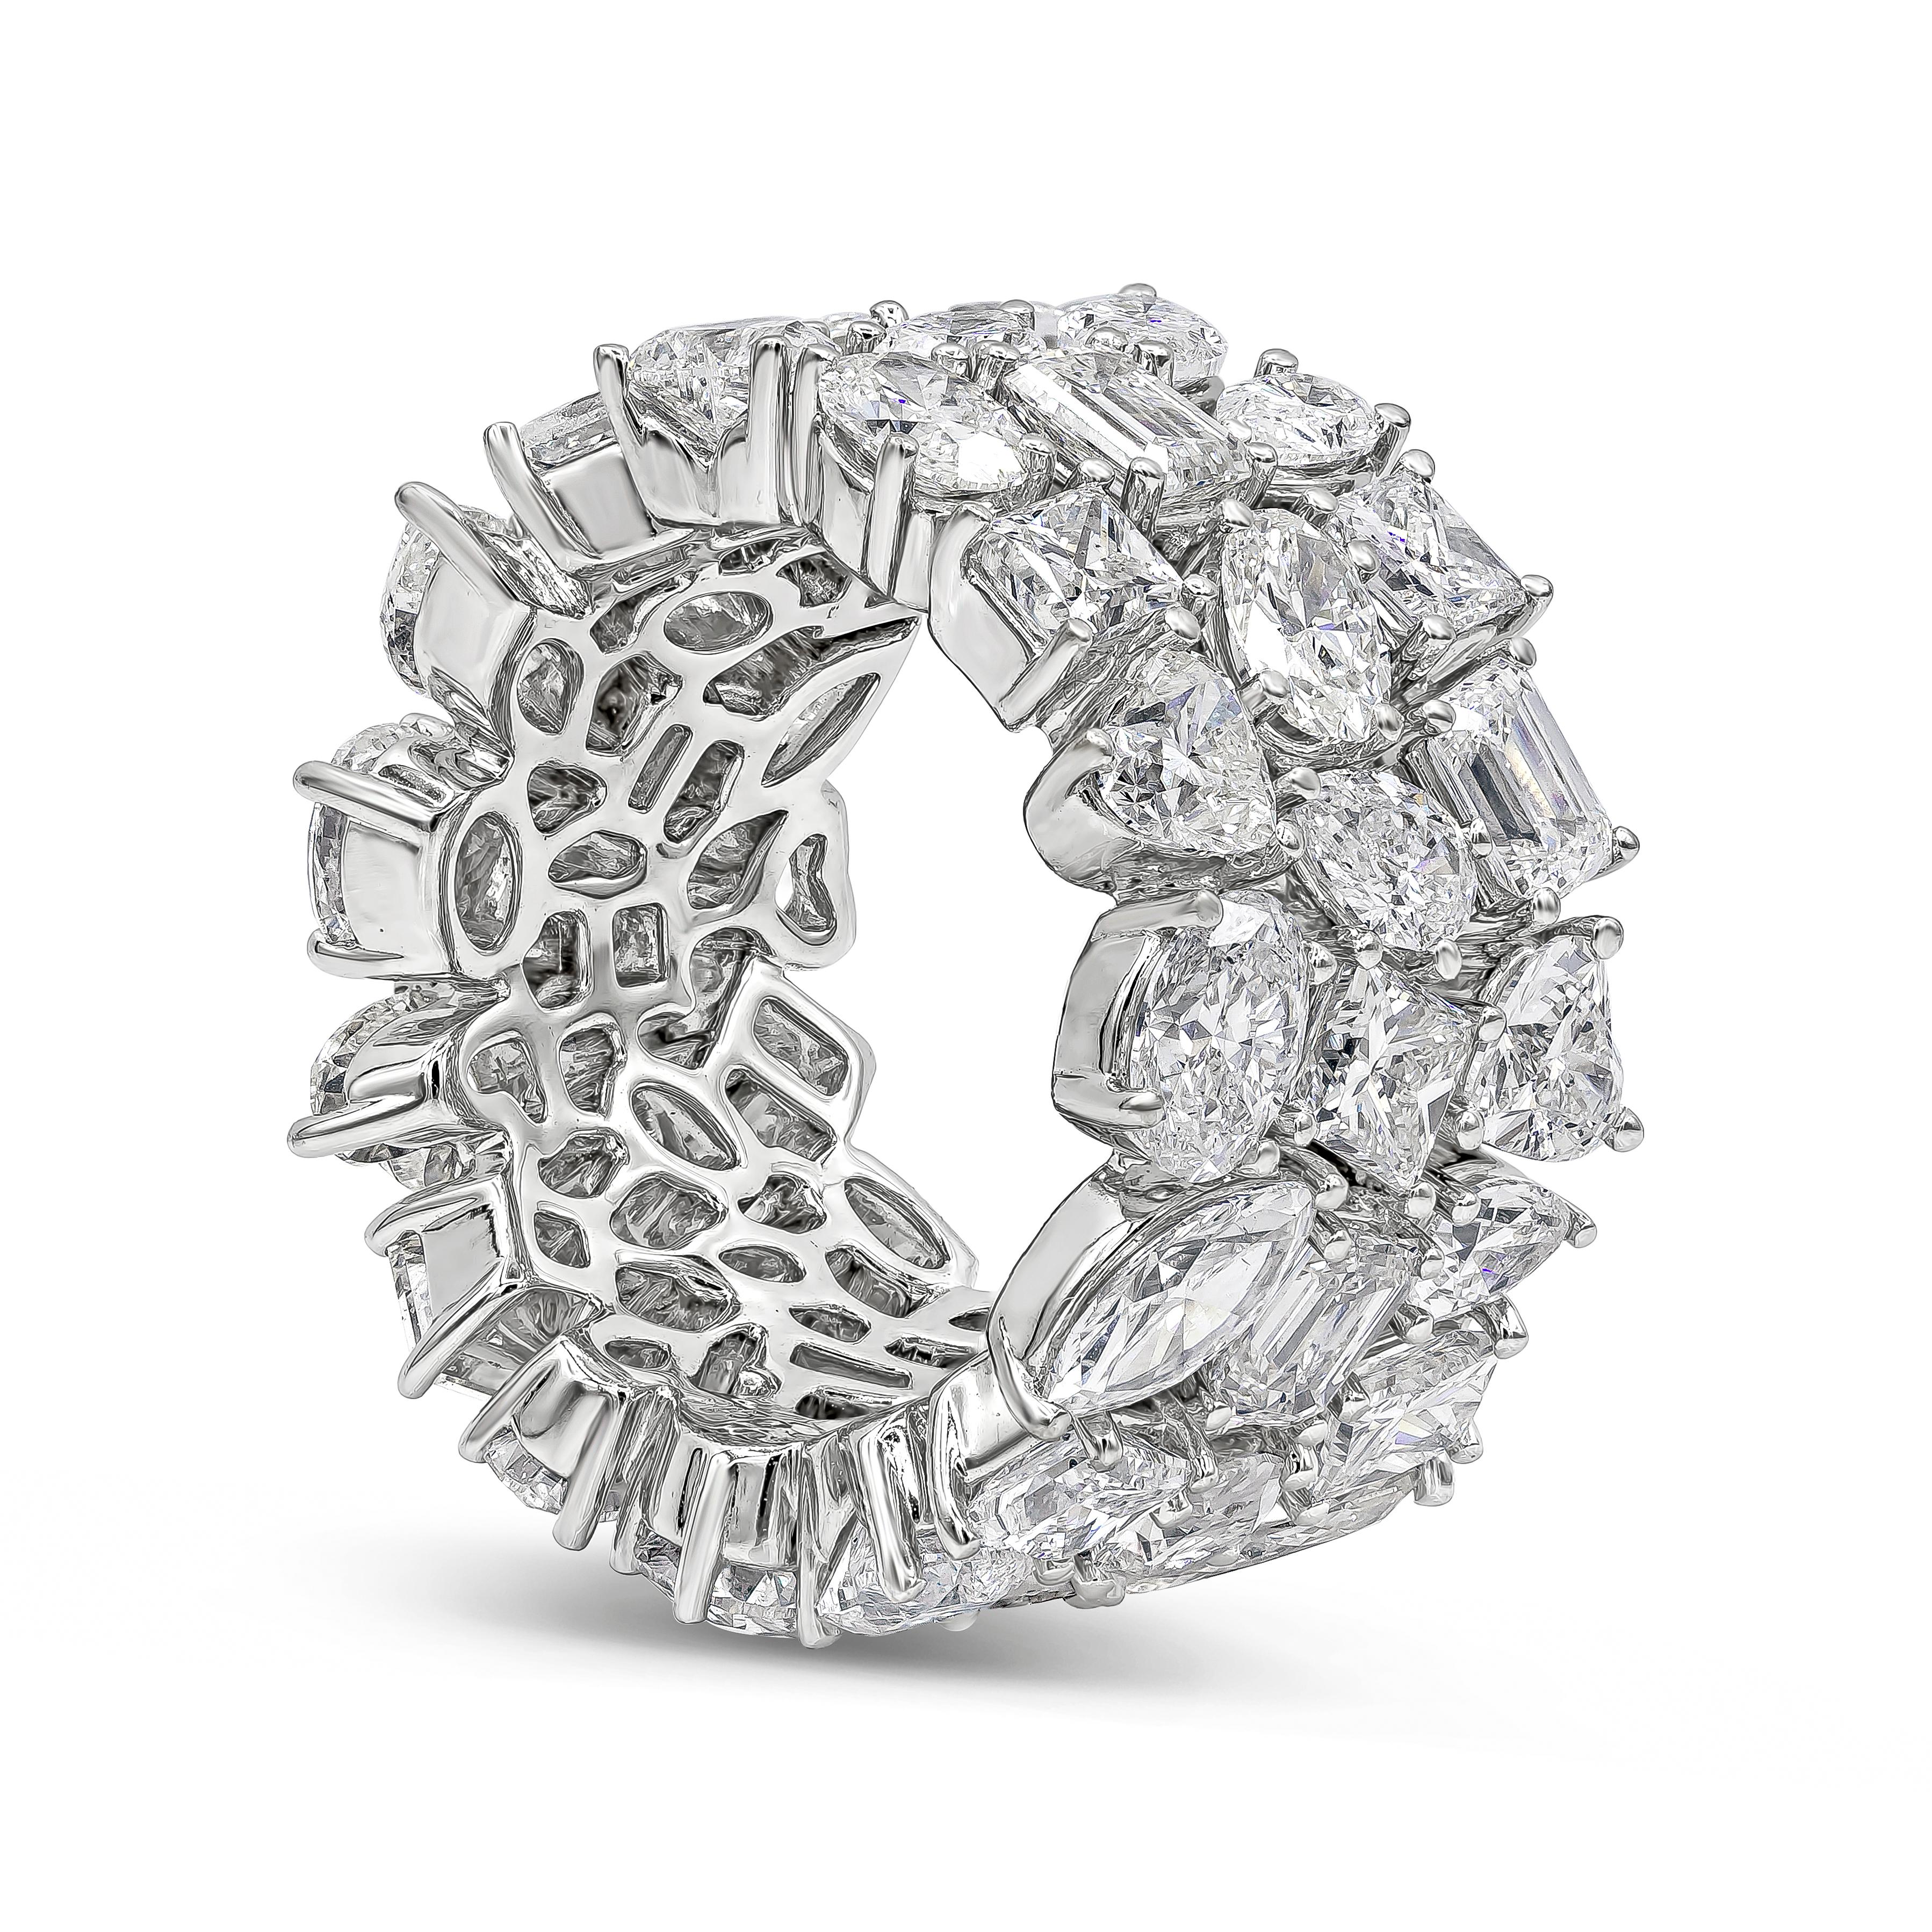 Approximately 5-8 weeks to handcraft.
A magnificent and unique piece of jewelry showcasing three-rows of fancy cut diamonds set in an open-work, floating diamond design made in platinum. Diamonds weigh approximately 12.87 carats total. 

Style